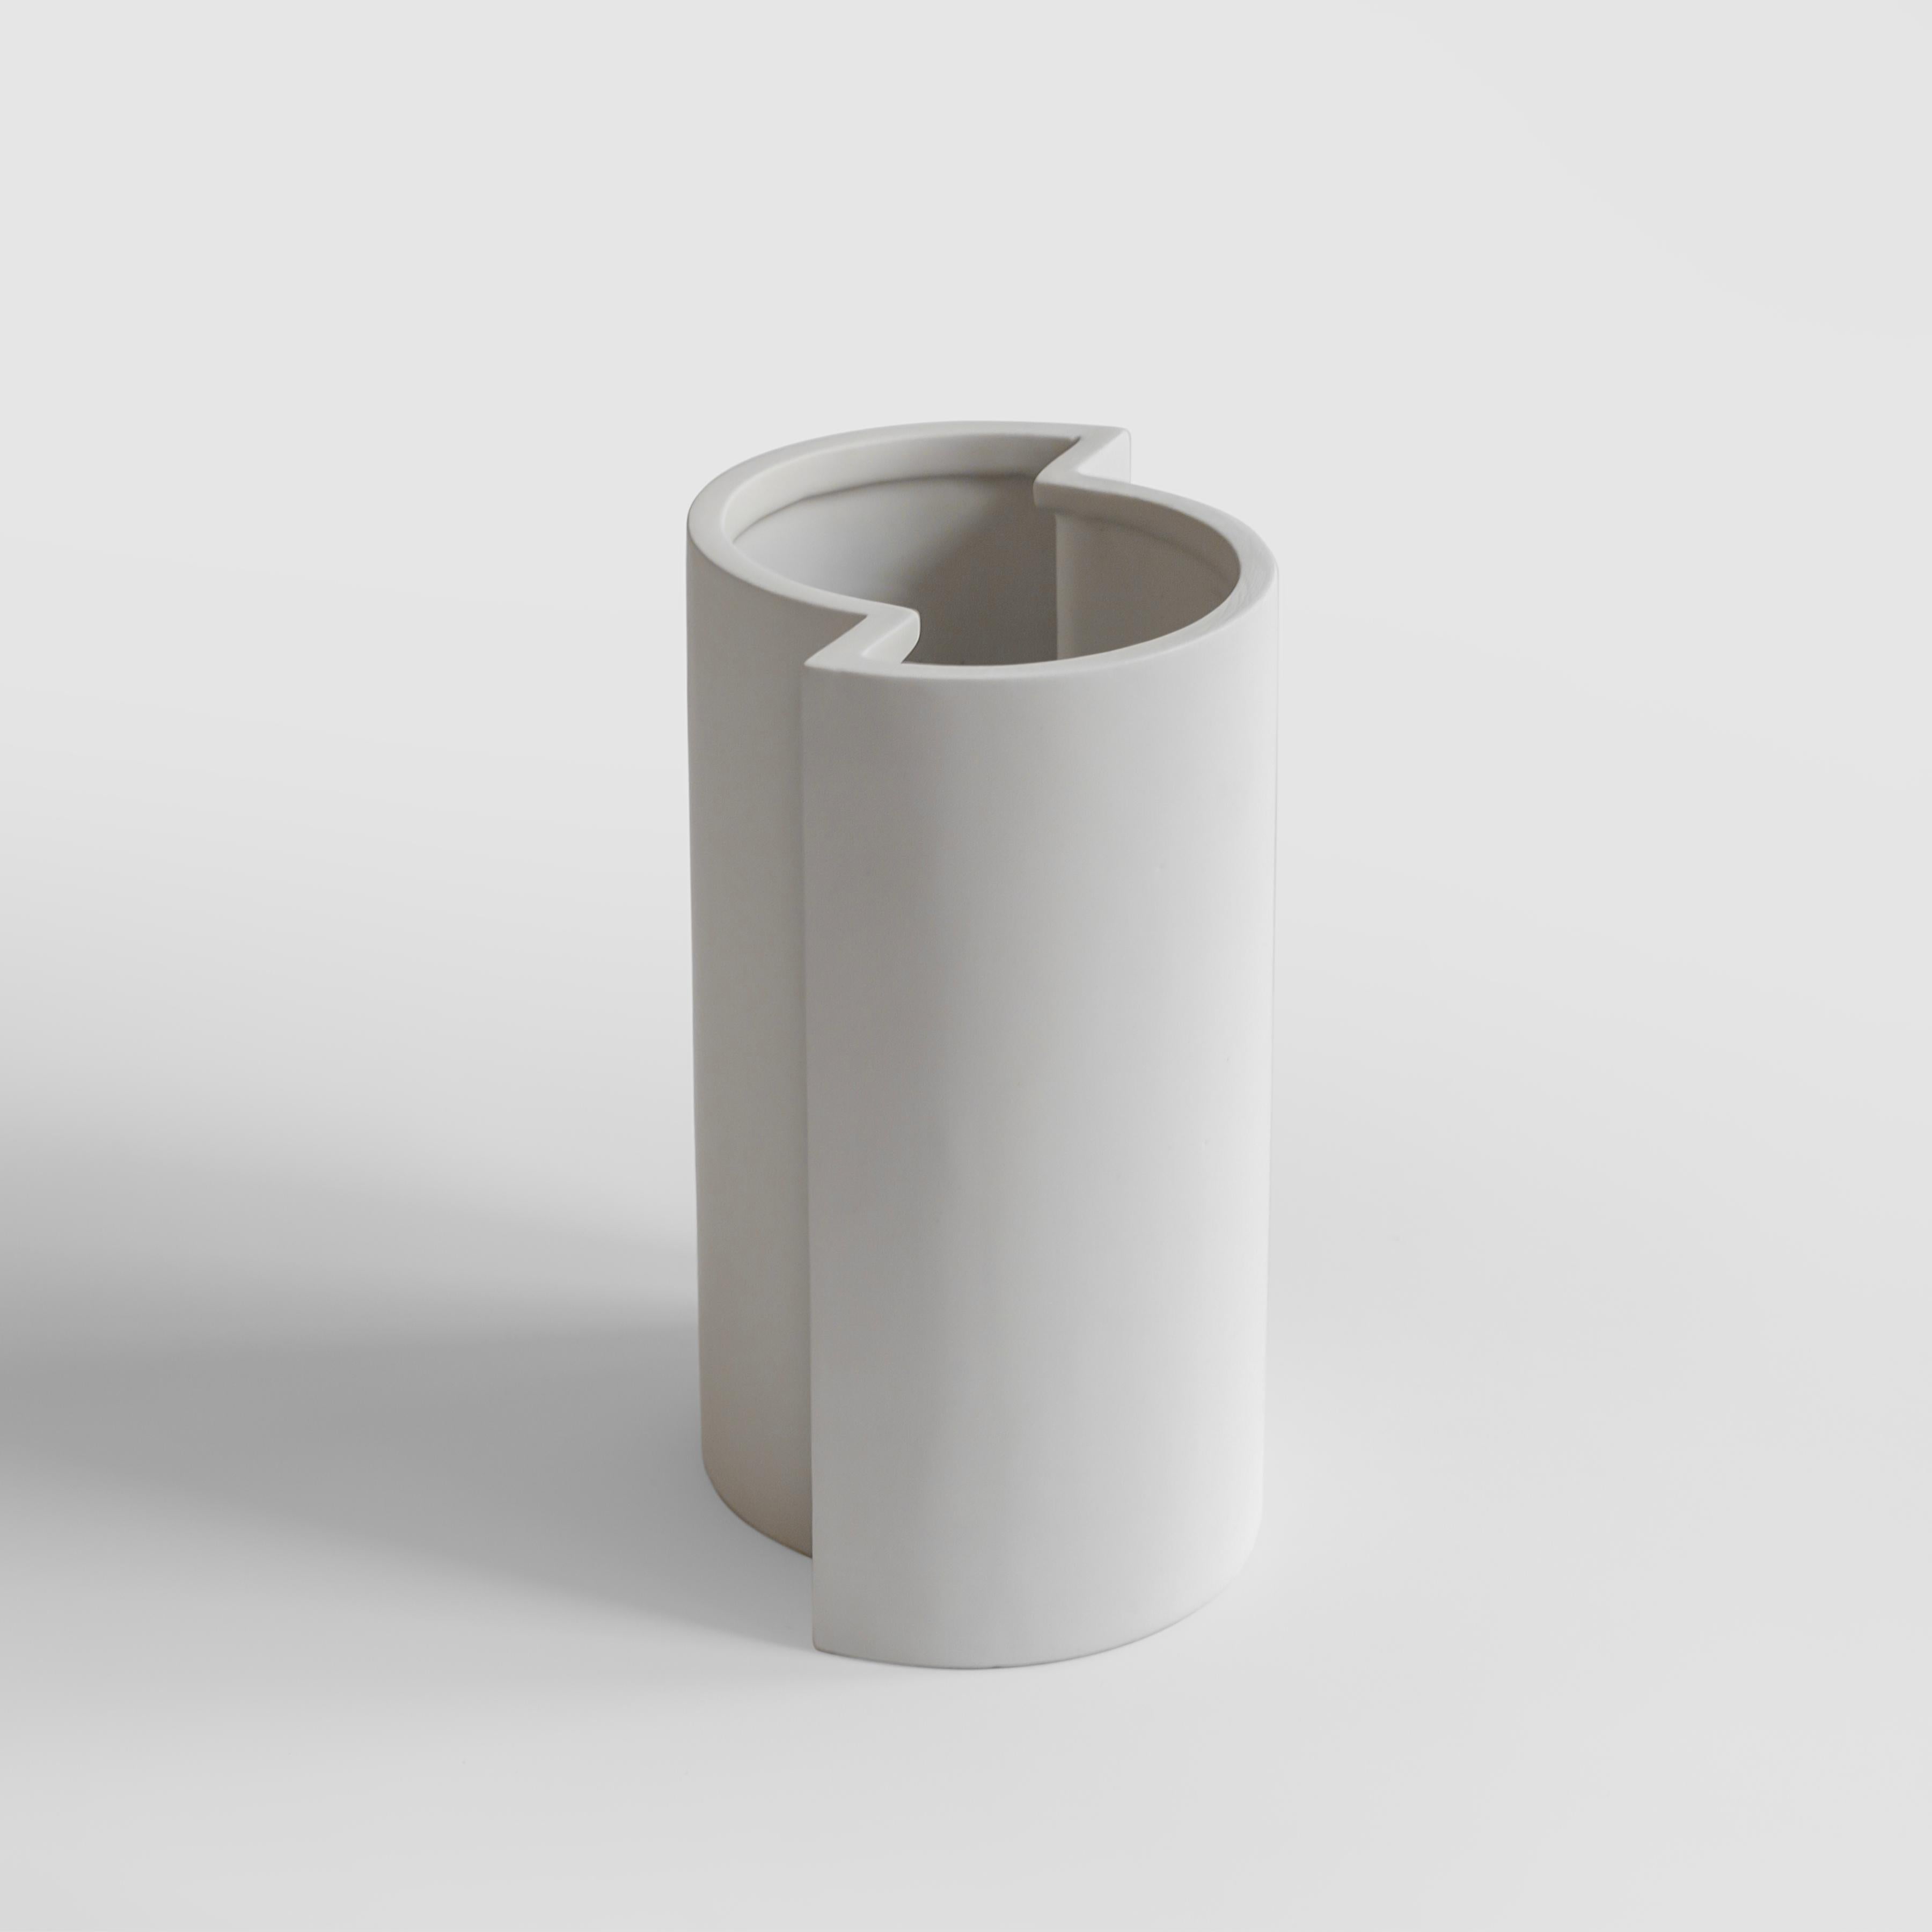 A minimalist and playful vase in slip-cast ceramic with a white matt crystalline glaze, the piece is handmade in Milan.
Part of the 